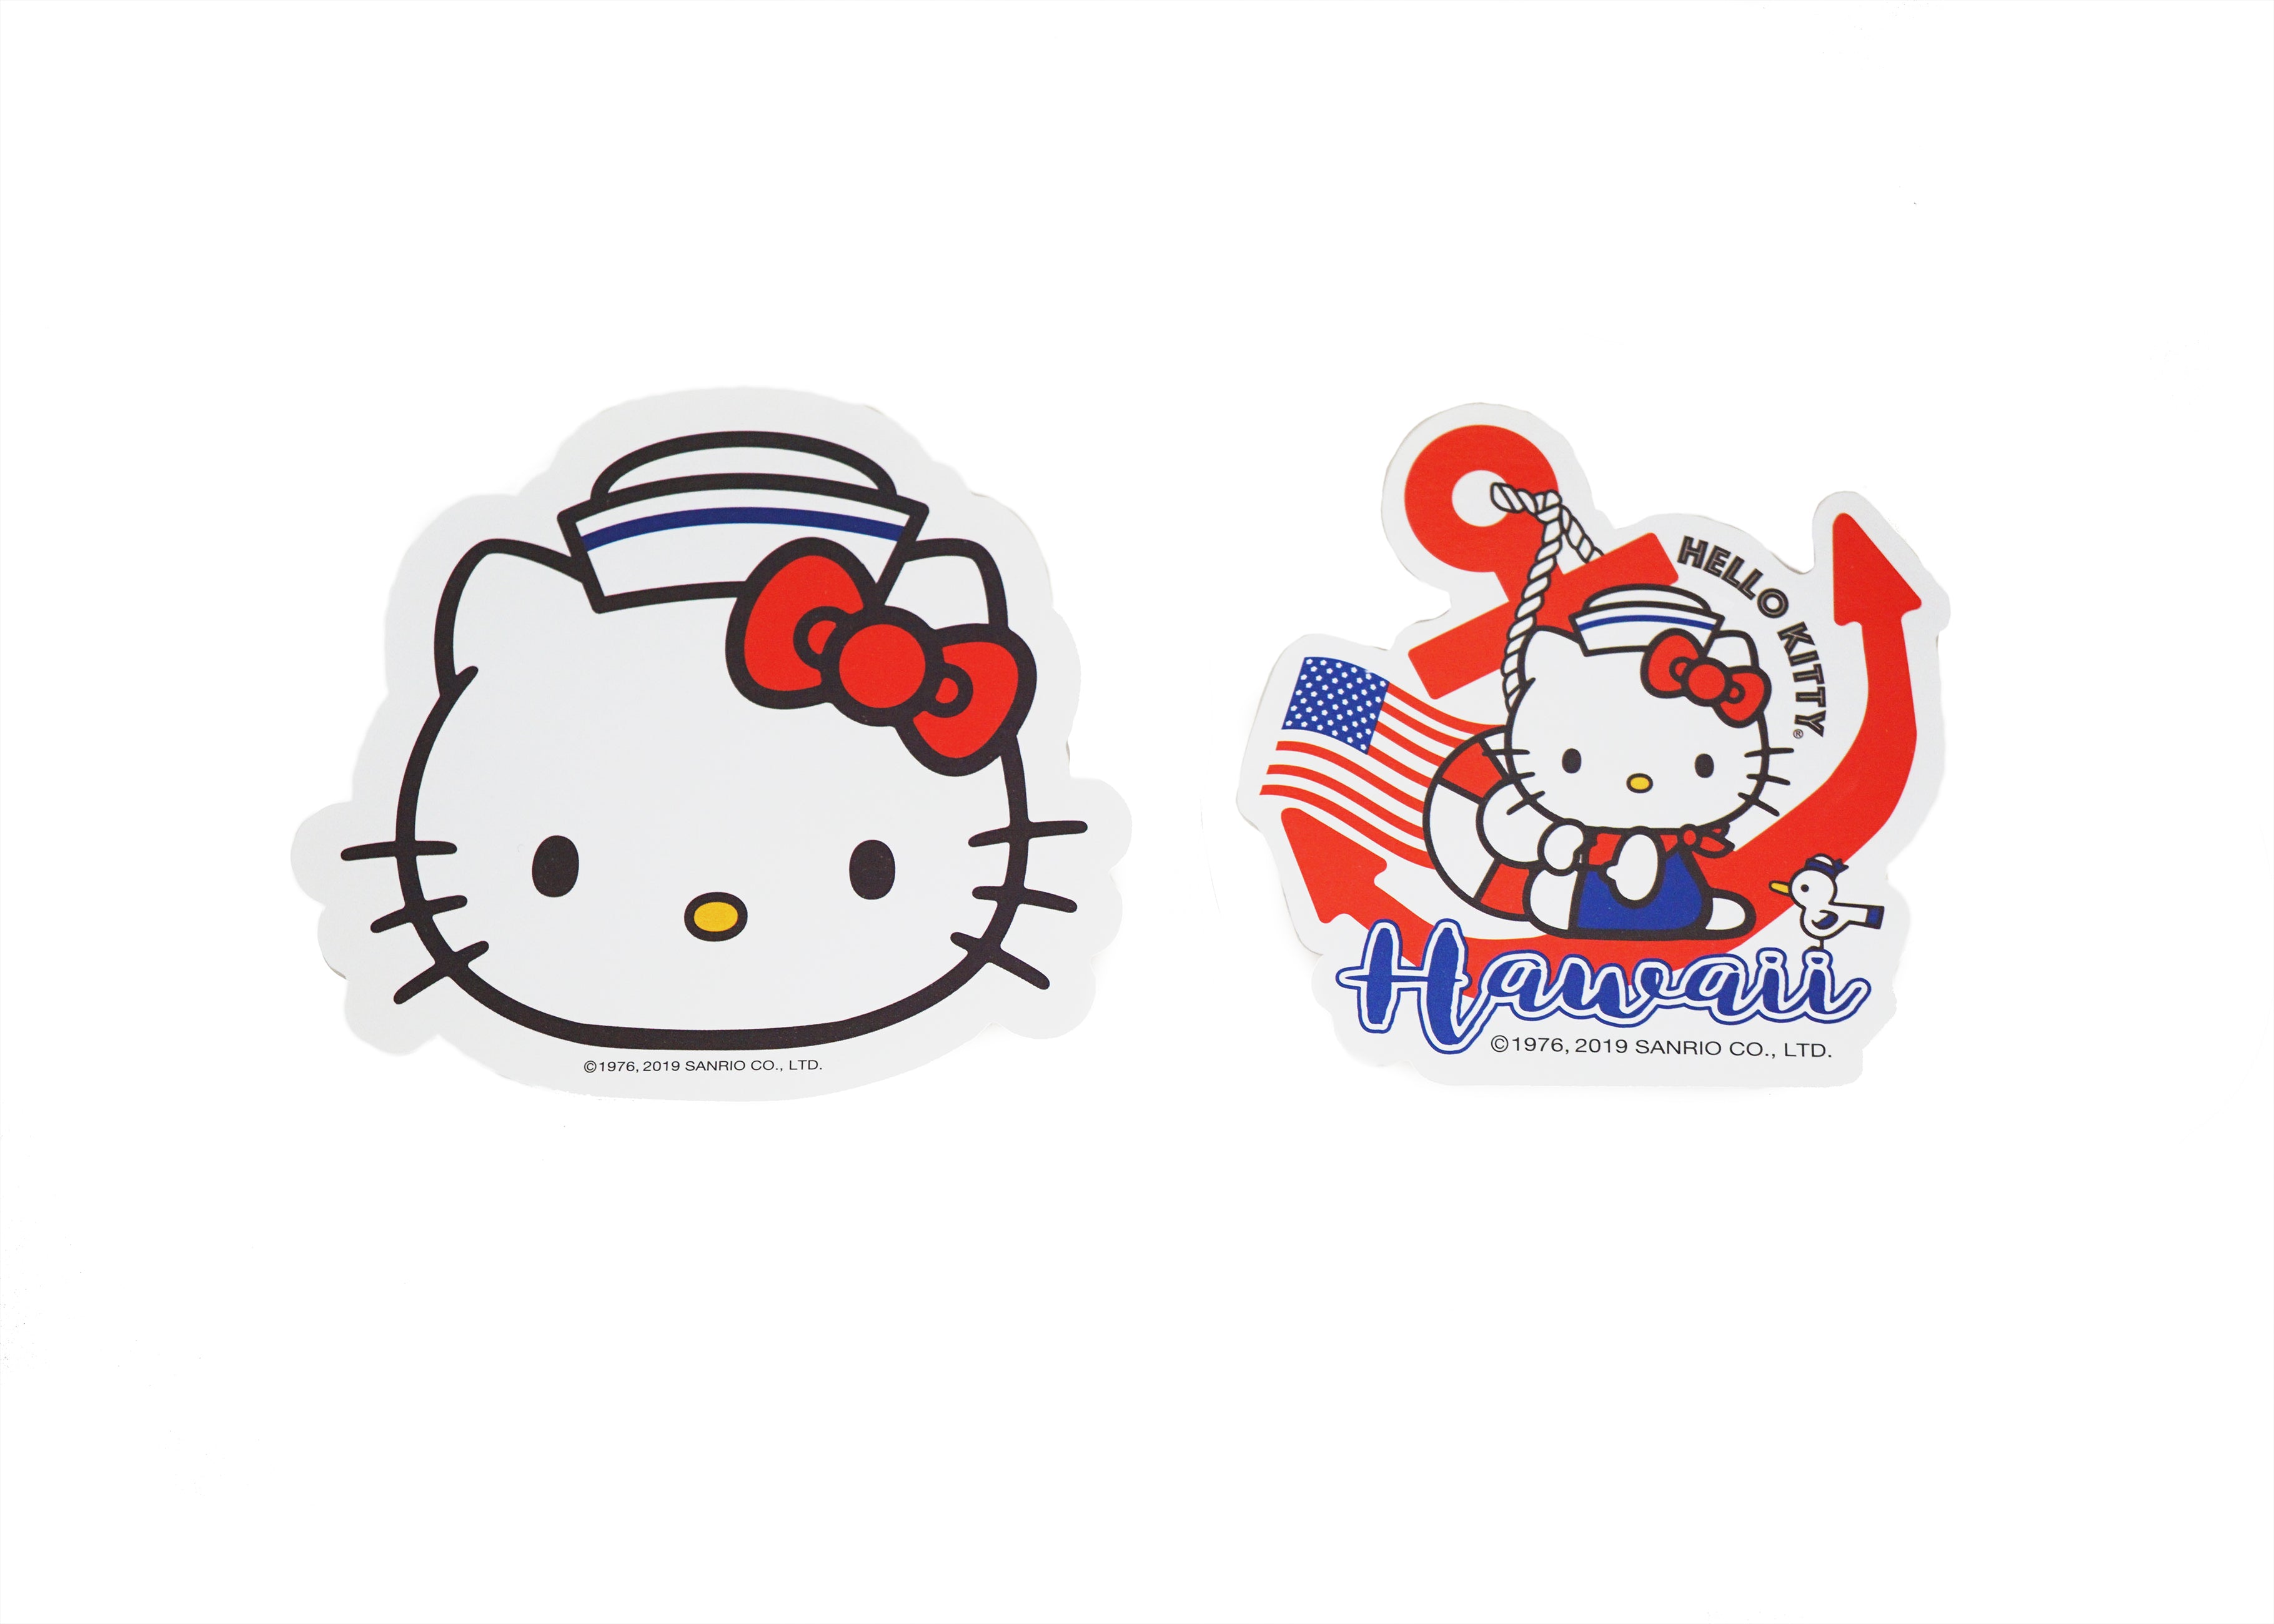 Hello Kitty Pins For Backpacks Online Collection